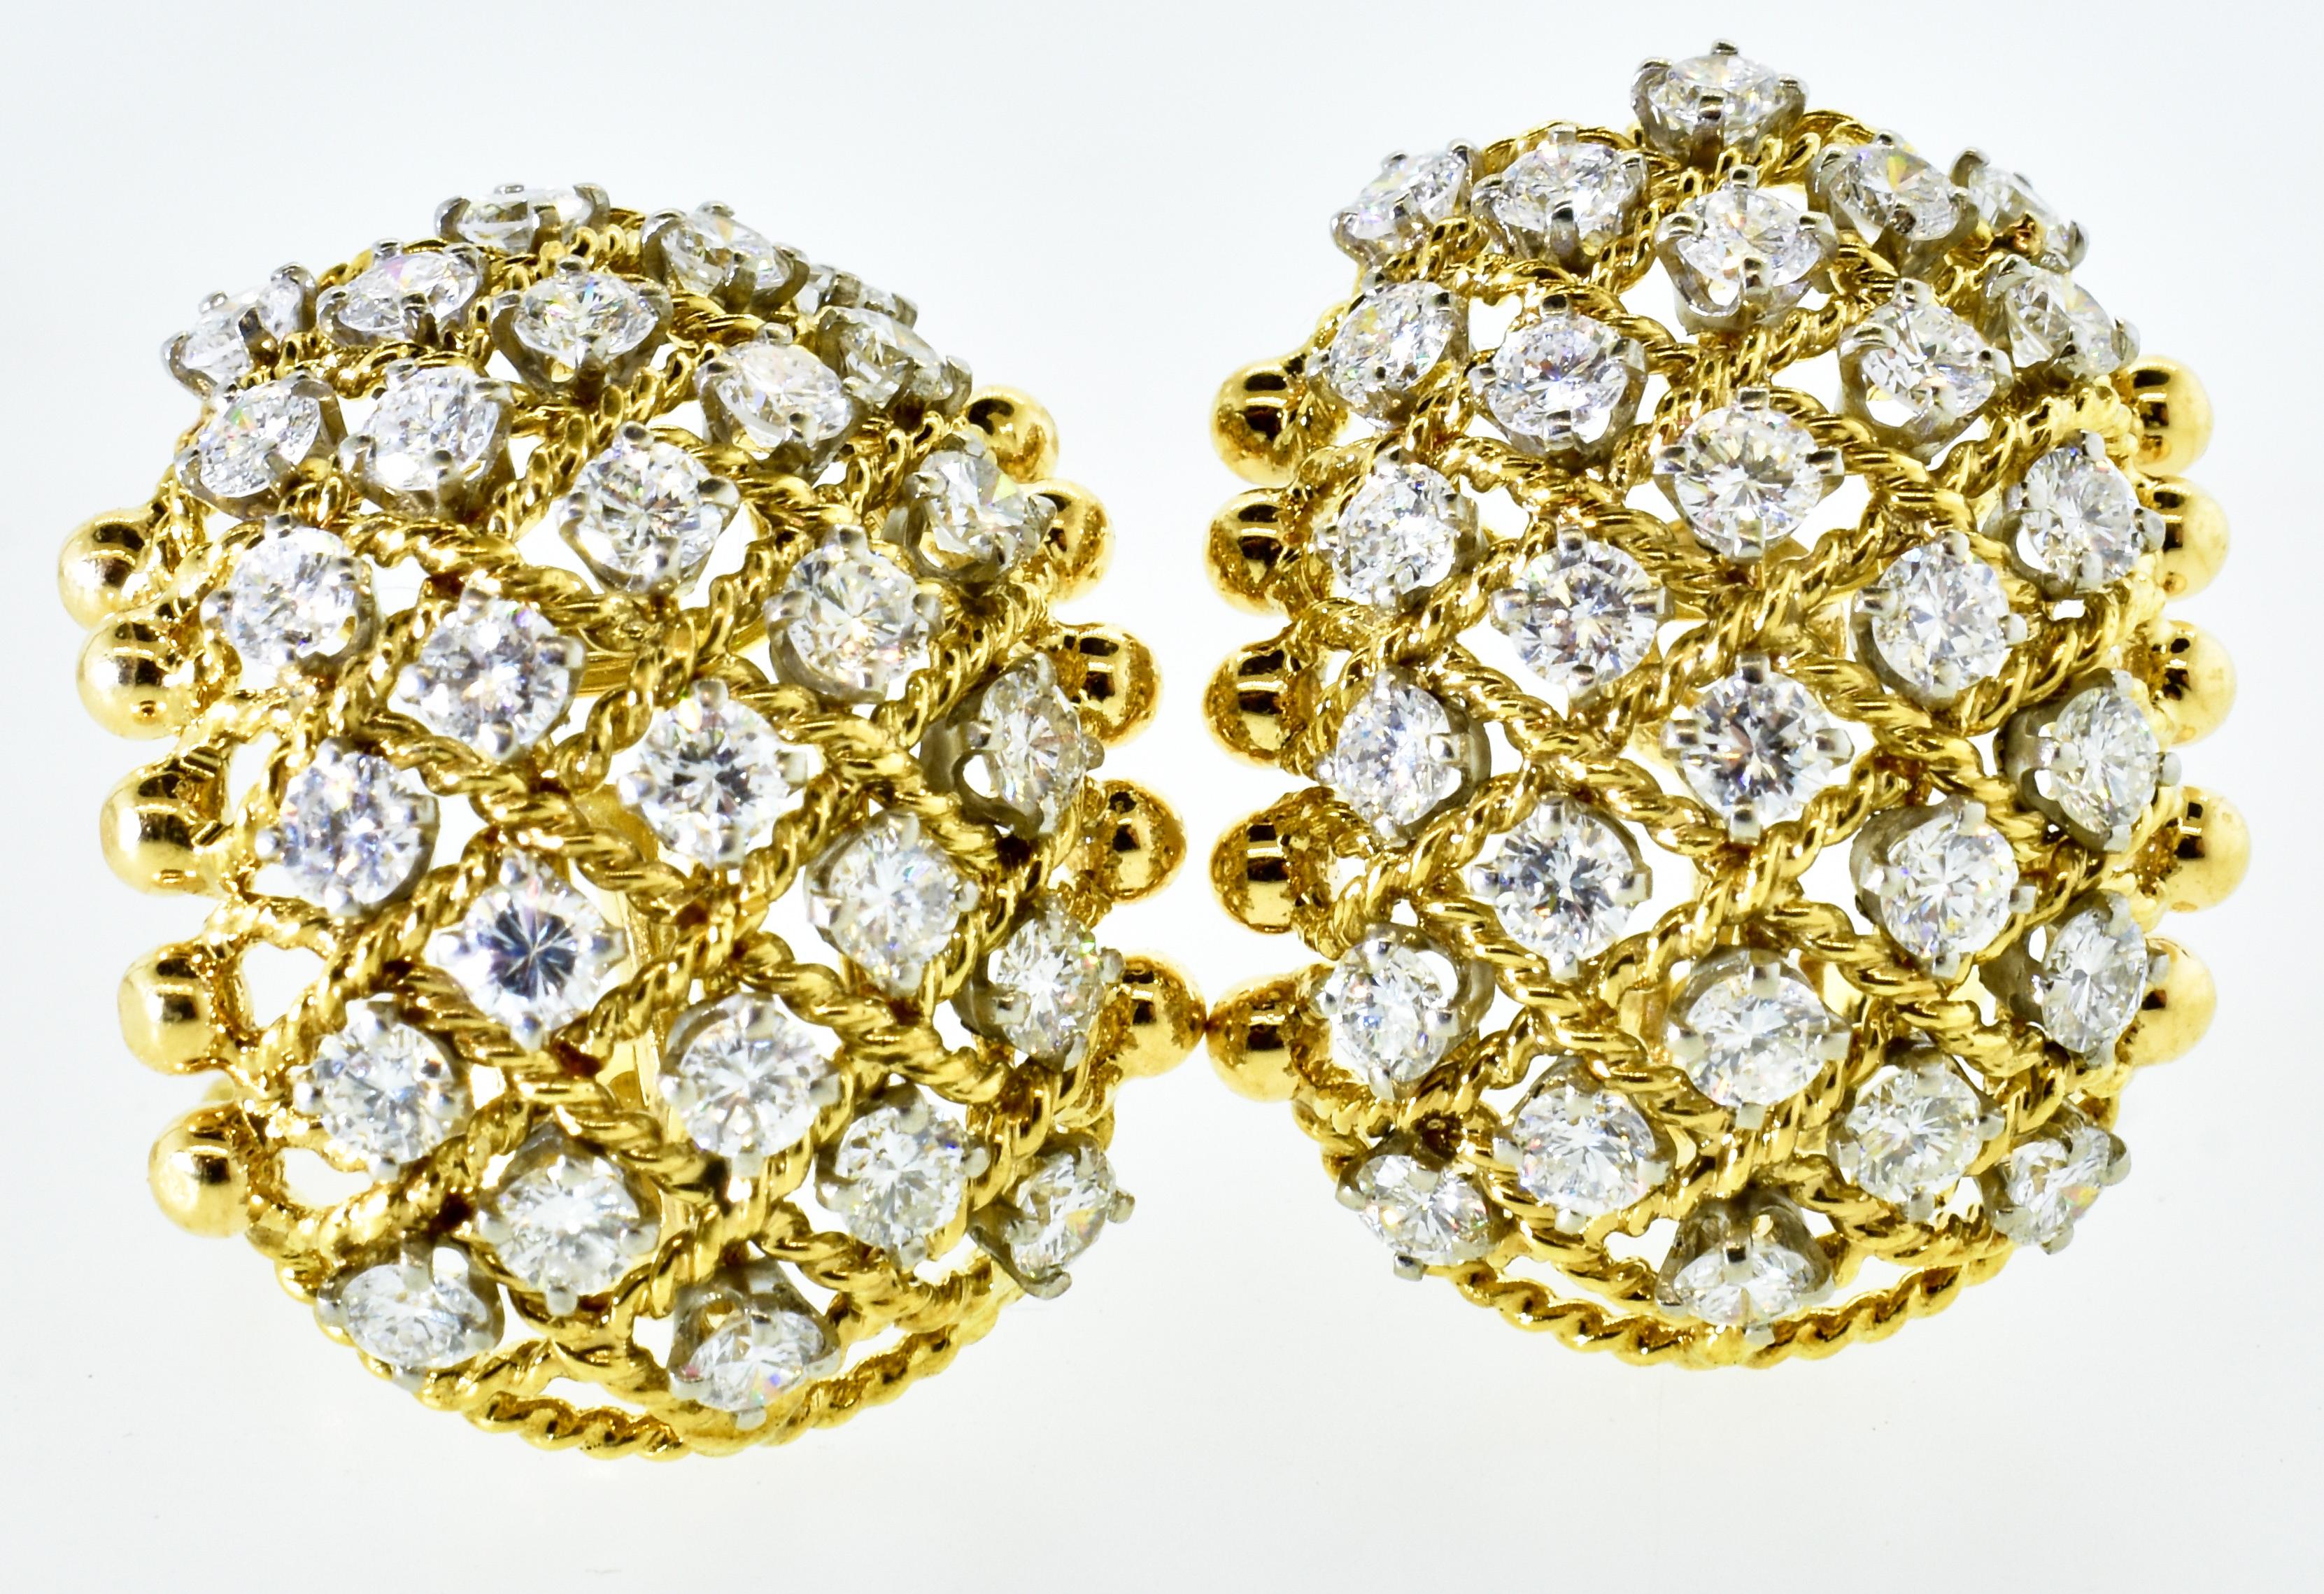 !8K yellow and white gold and fine white brilliant cut diamond vintage earrings.  Well made with fine well matched, finely cut stones - all near colorless (H) and very slightly included (VS1).  The 6 cts. of diamonds are set in Platinum prongs which